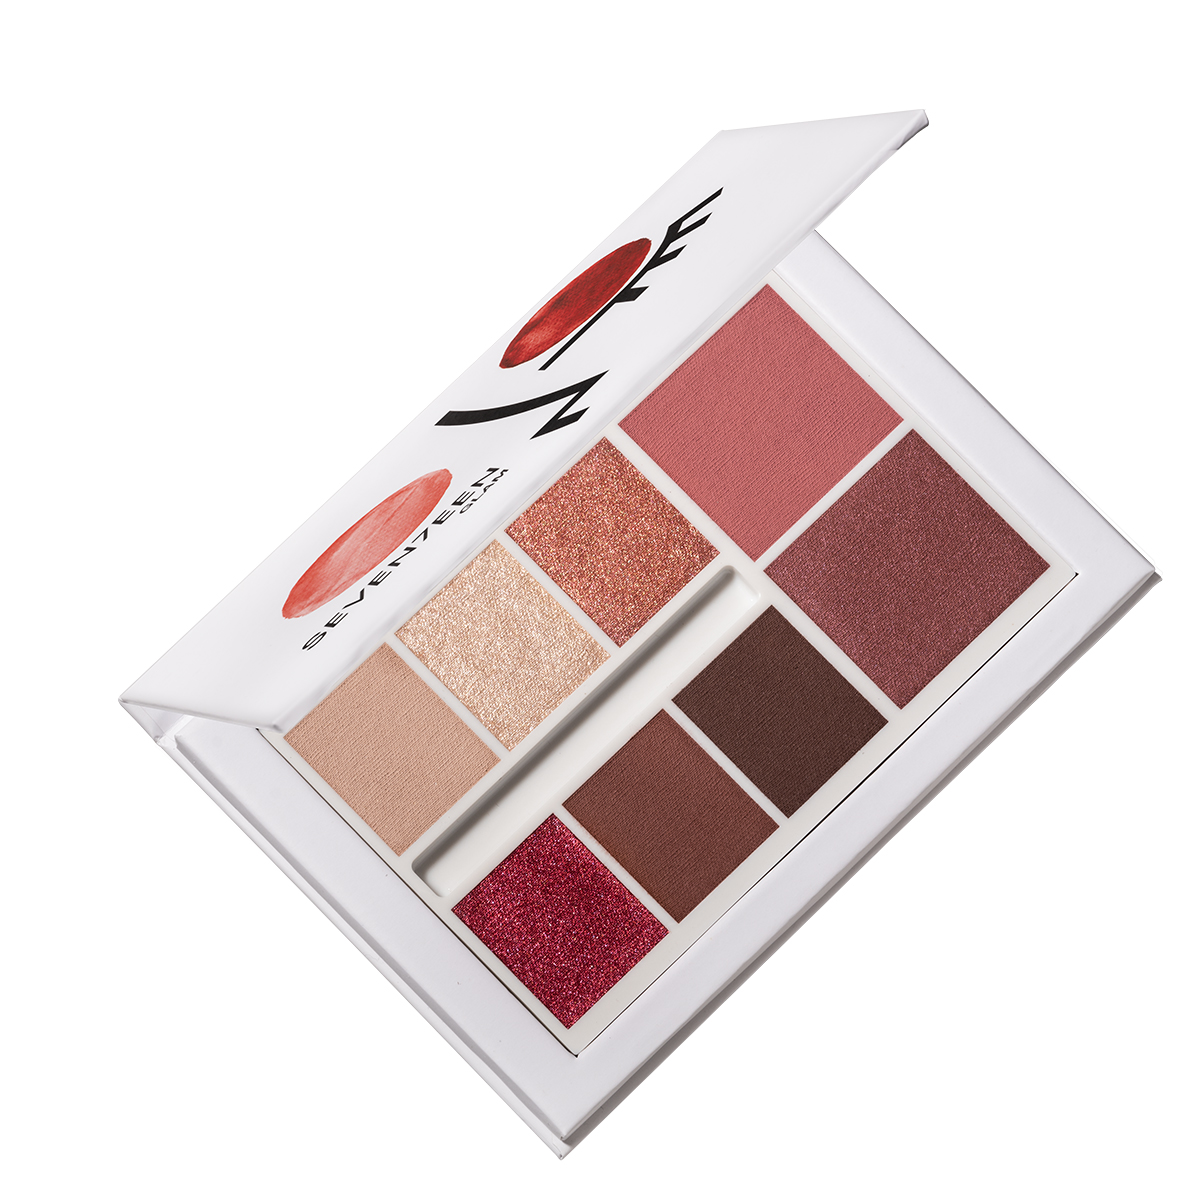 Limited edition total look palette in red and brown shades